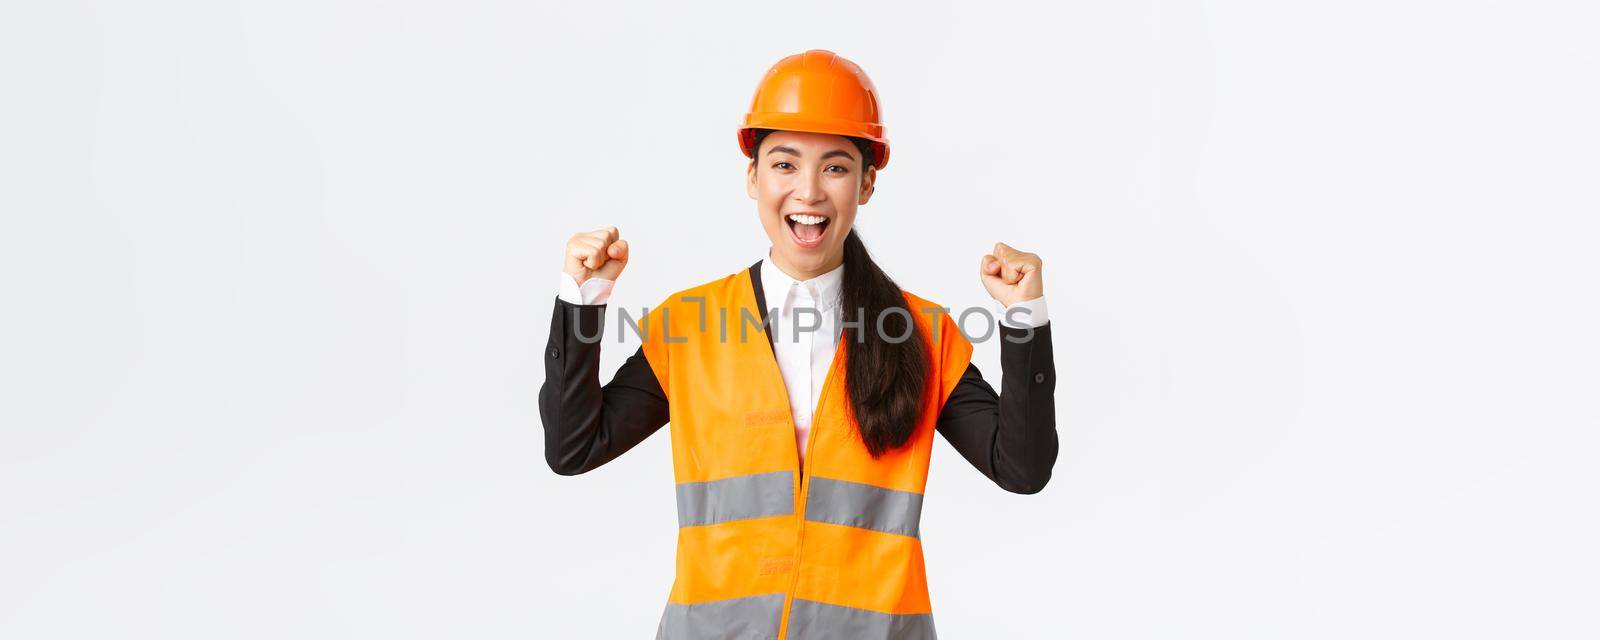 Successful winning female asian engineer fist pump and shout yes delighted, wear safety helmet and jacket, triumphing over victory, finish building in time, standing satisfied white background.